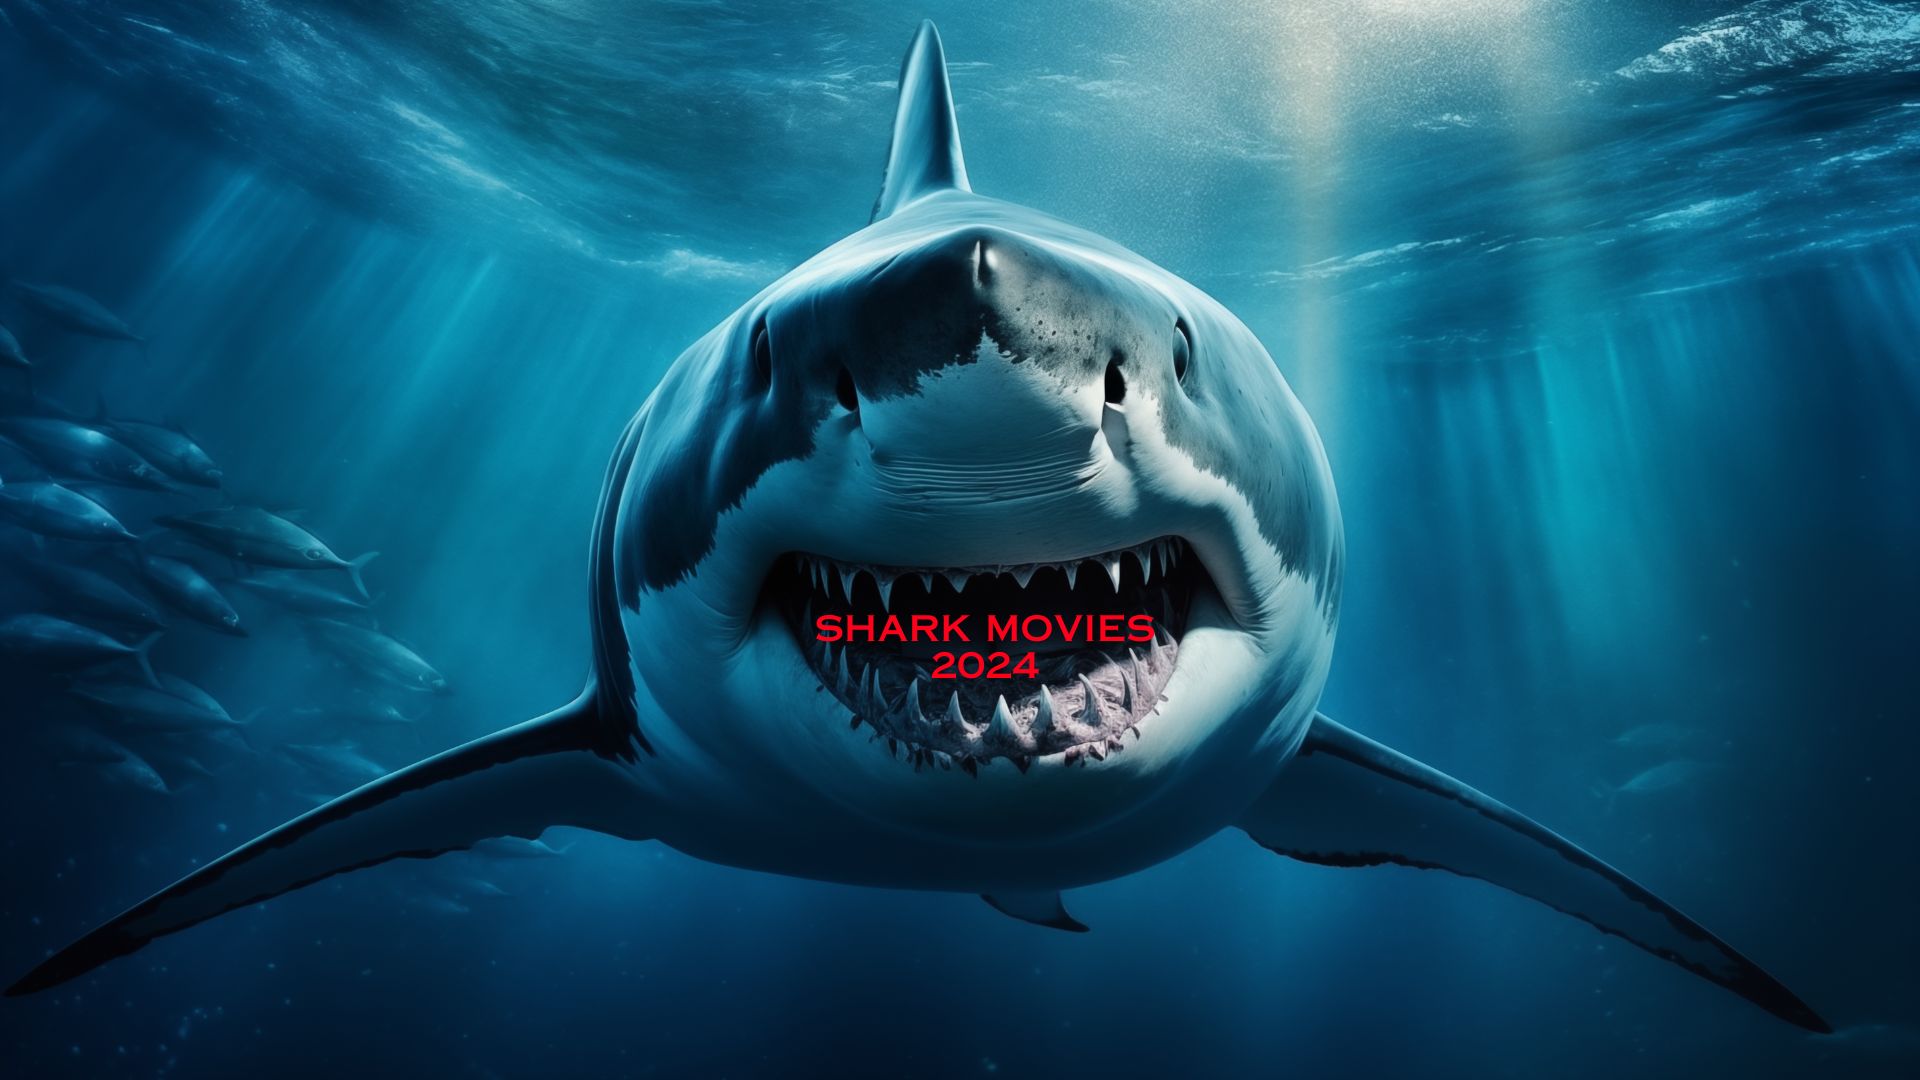 Movies with Sharks in 2024